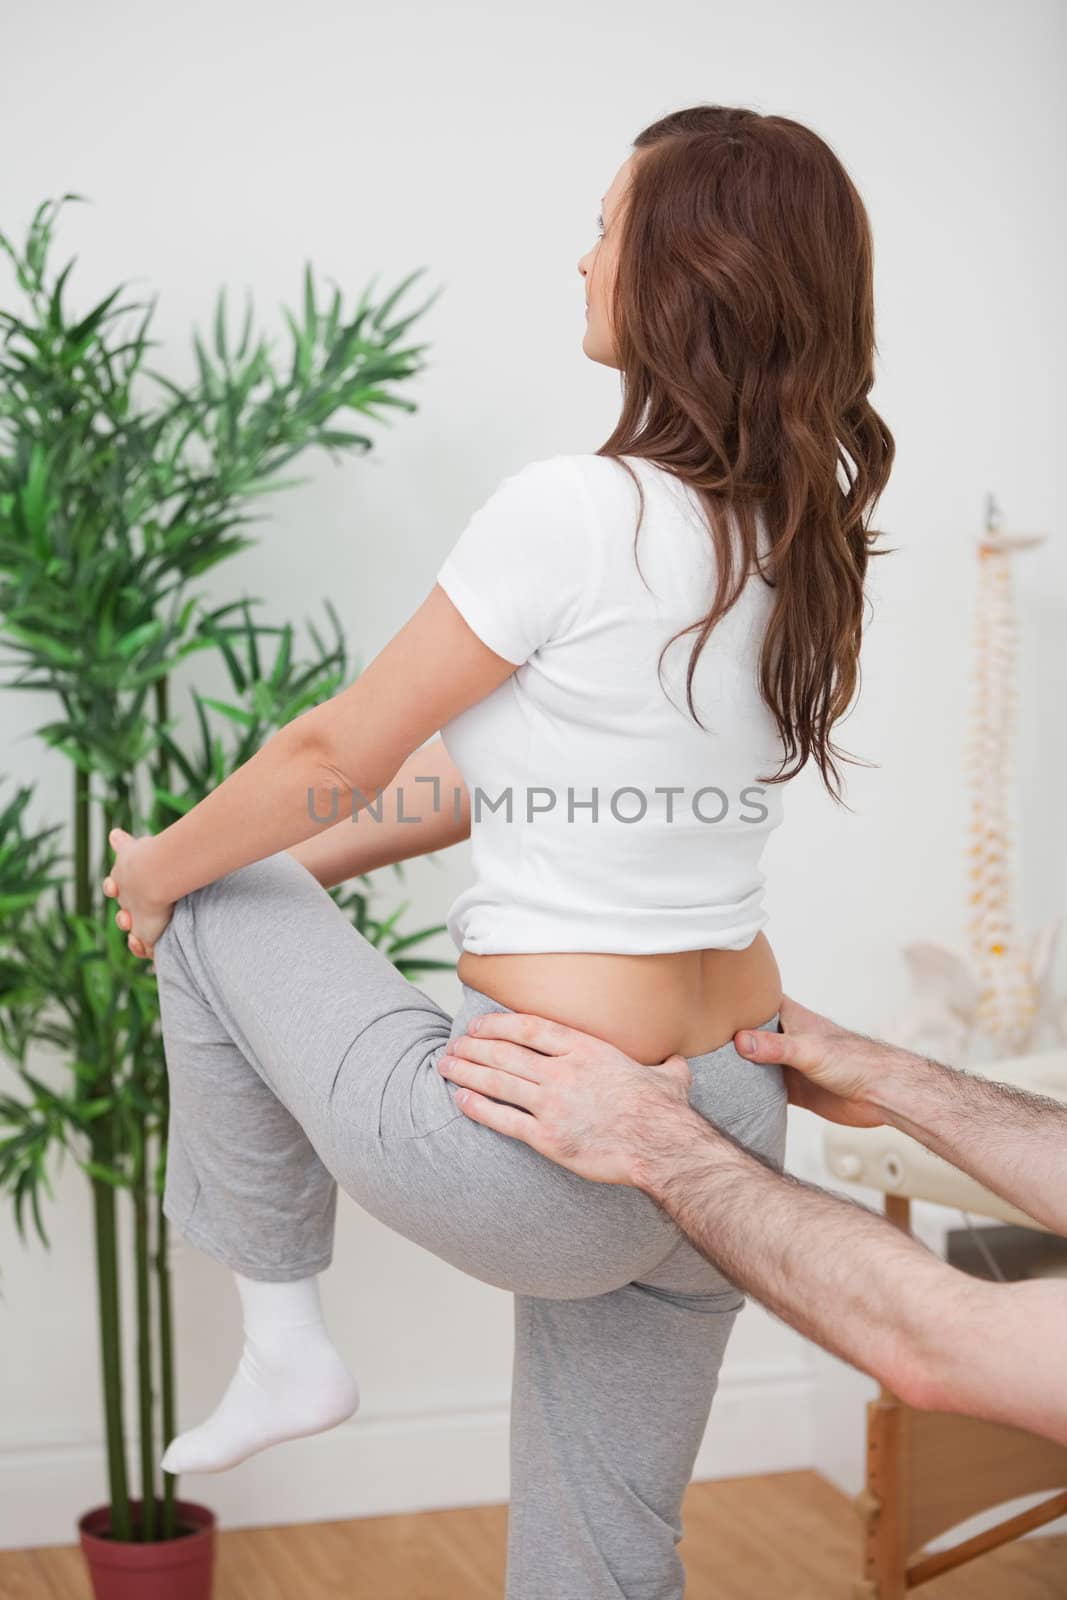 Woman stretching her leg while a man is touching her back in a room